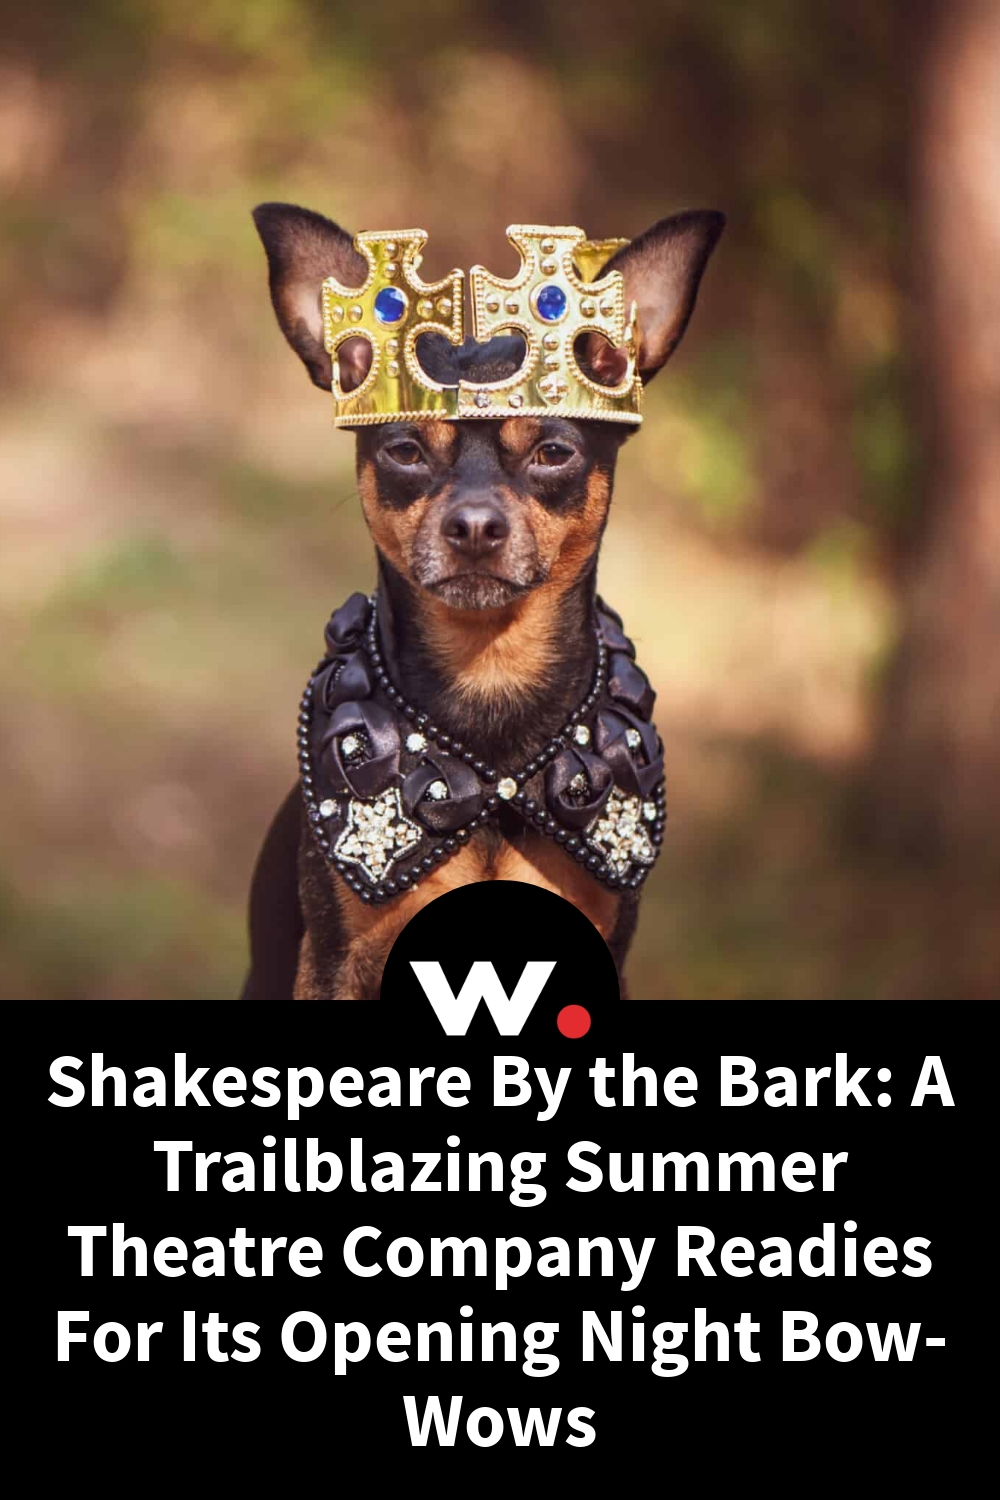 Shakespeare By the Bark: A Trailblazing Summer Theatre Company Readies For Its Opening Night Bow-Wows